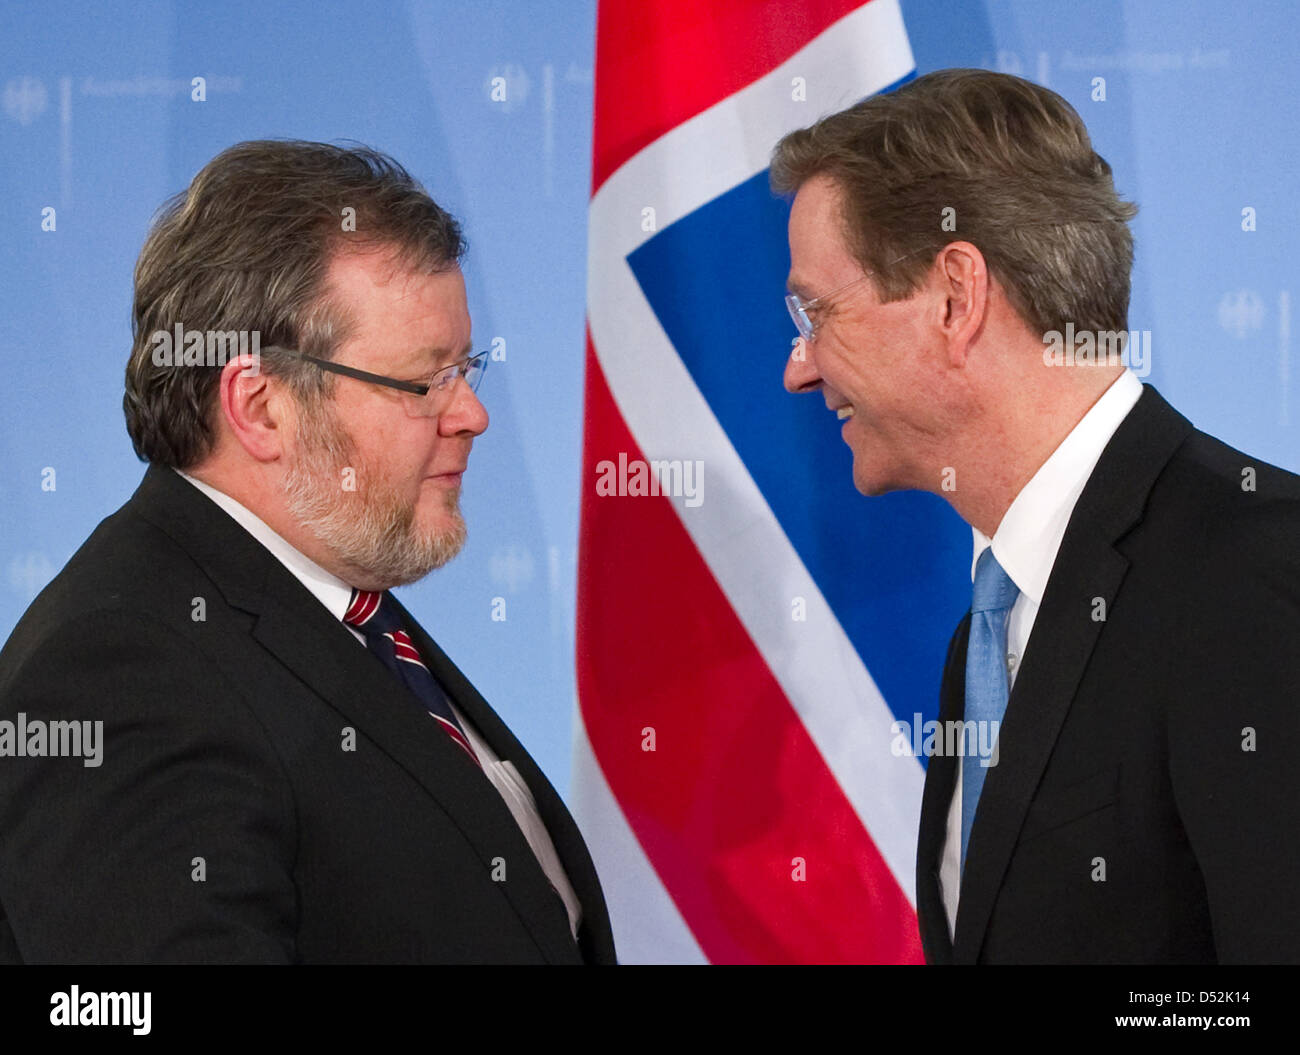 German Foreign Minister Guido Westerwelle (R) and his Icelandic counterpart Ossur Skarphedinsson (L) shake hands in the Foreign Office of Gerlin, Germany, 04 March 2010. Both met for talks on European and international topics. Photo: ARNO BURGI Stock Photo